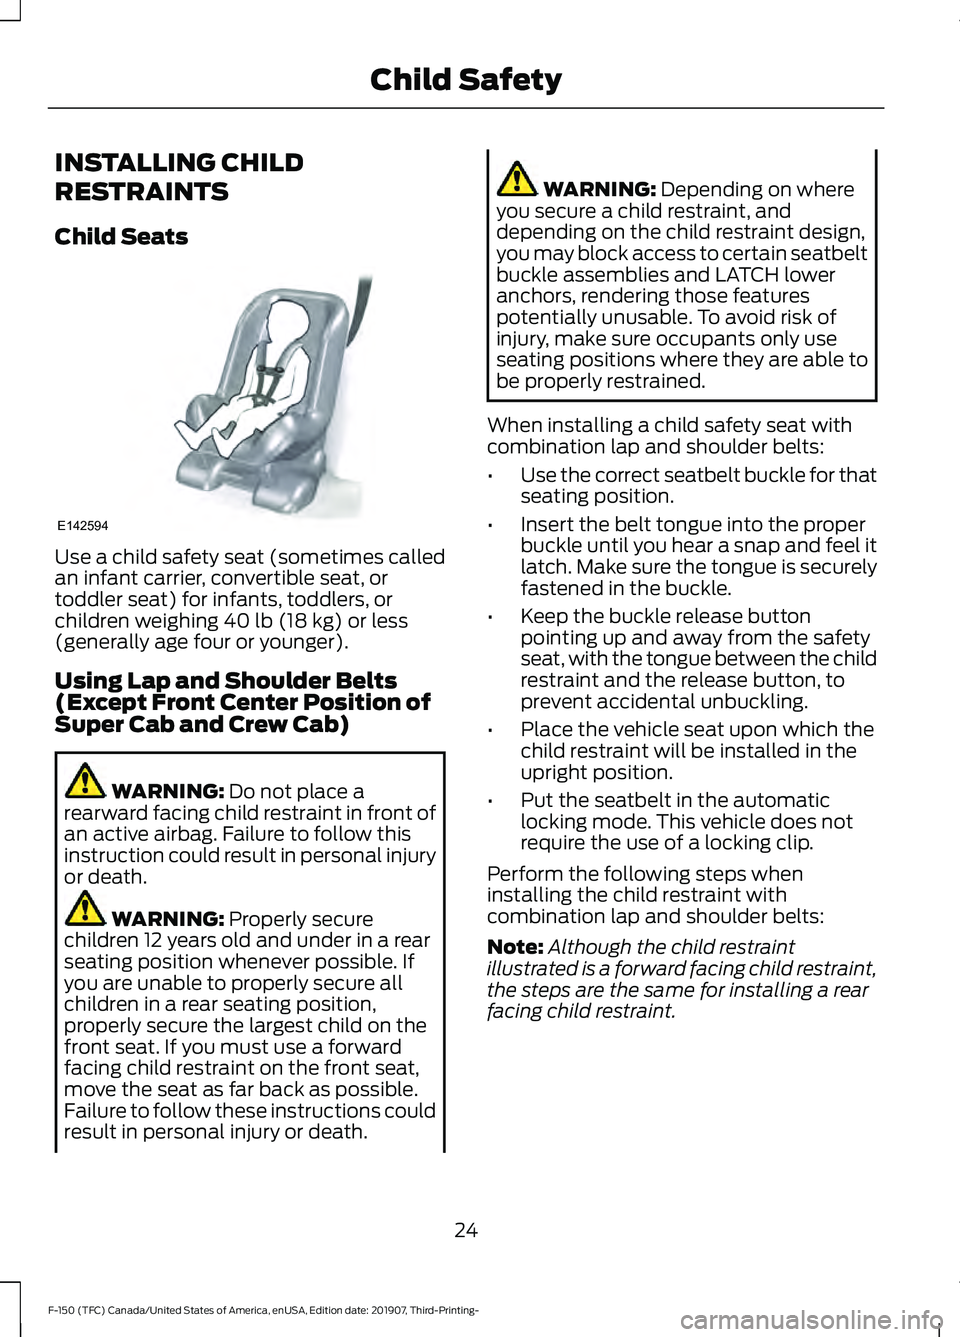 FORD F-150 2020  Owners Manual INSTALLING CHILD
RESTRAINTS
Child Seats
Use a child safety seat (sometimes called
an infant carrier, convertible seat, or
toddler seat) for infants, toddlers, or
children weighing 40 lb (18 kg) or les